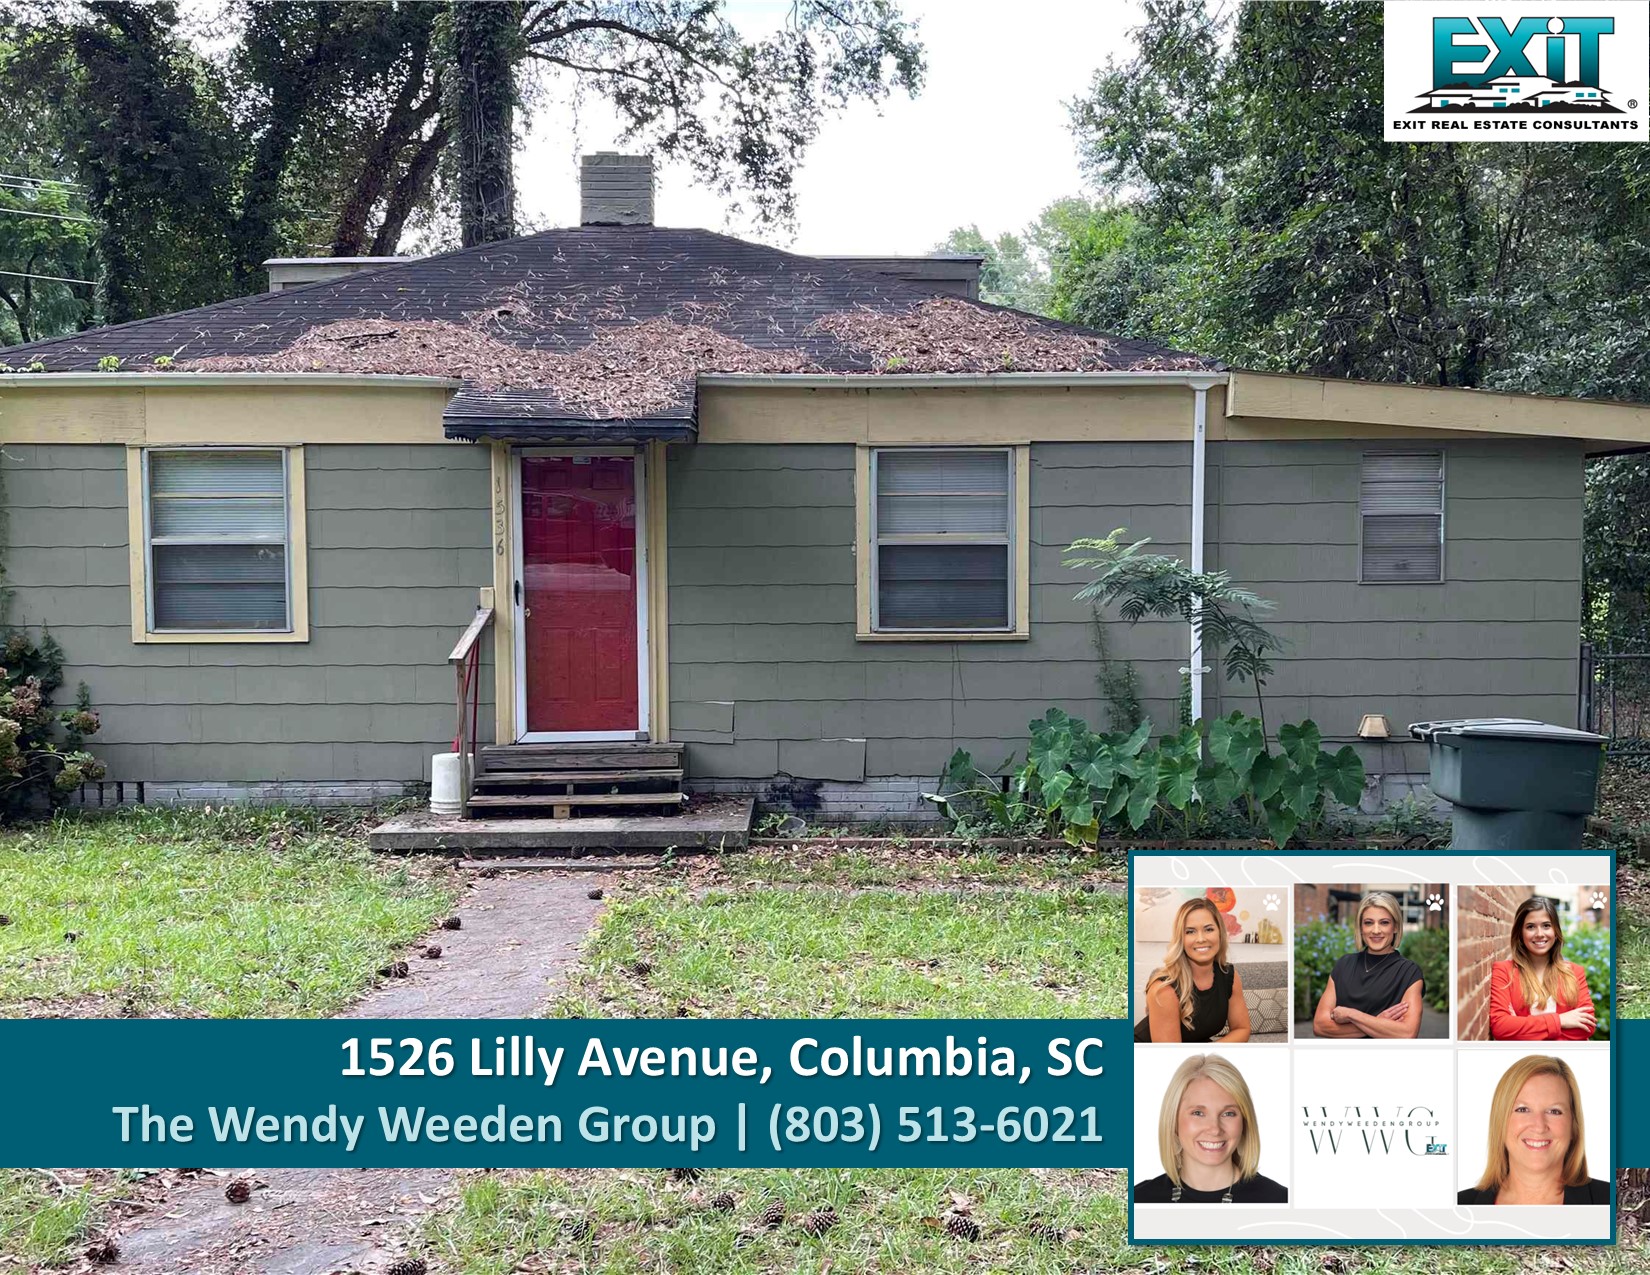 Just listed in Windy Ridge - Columbia